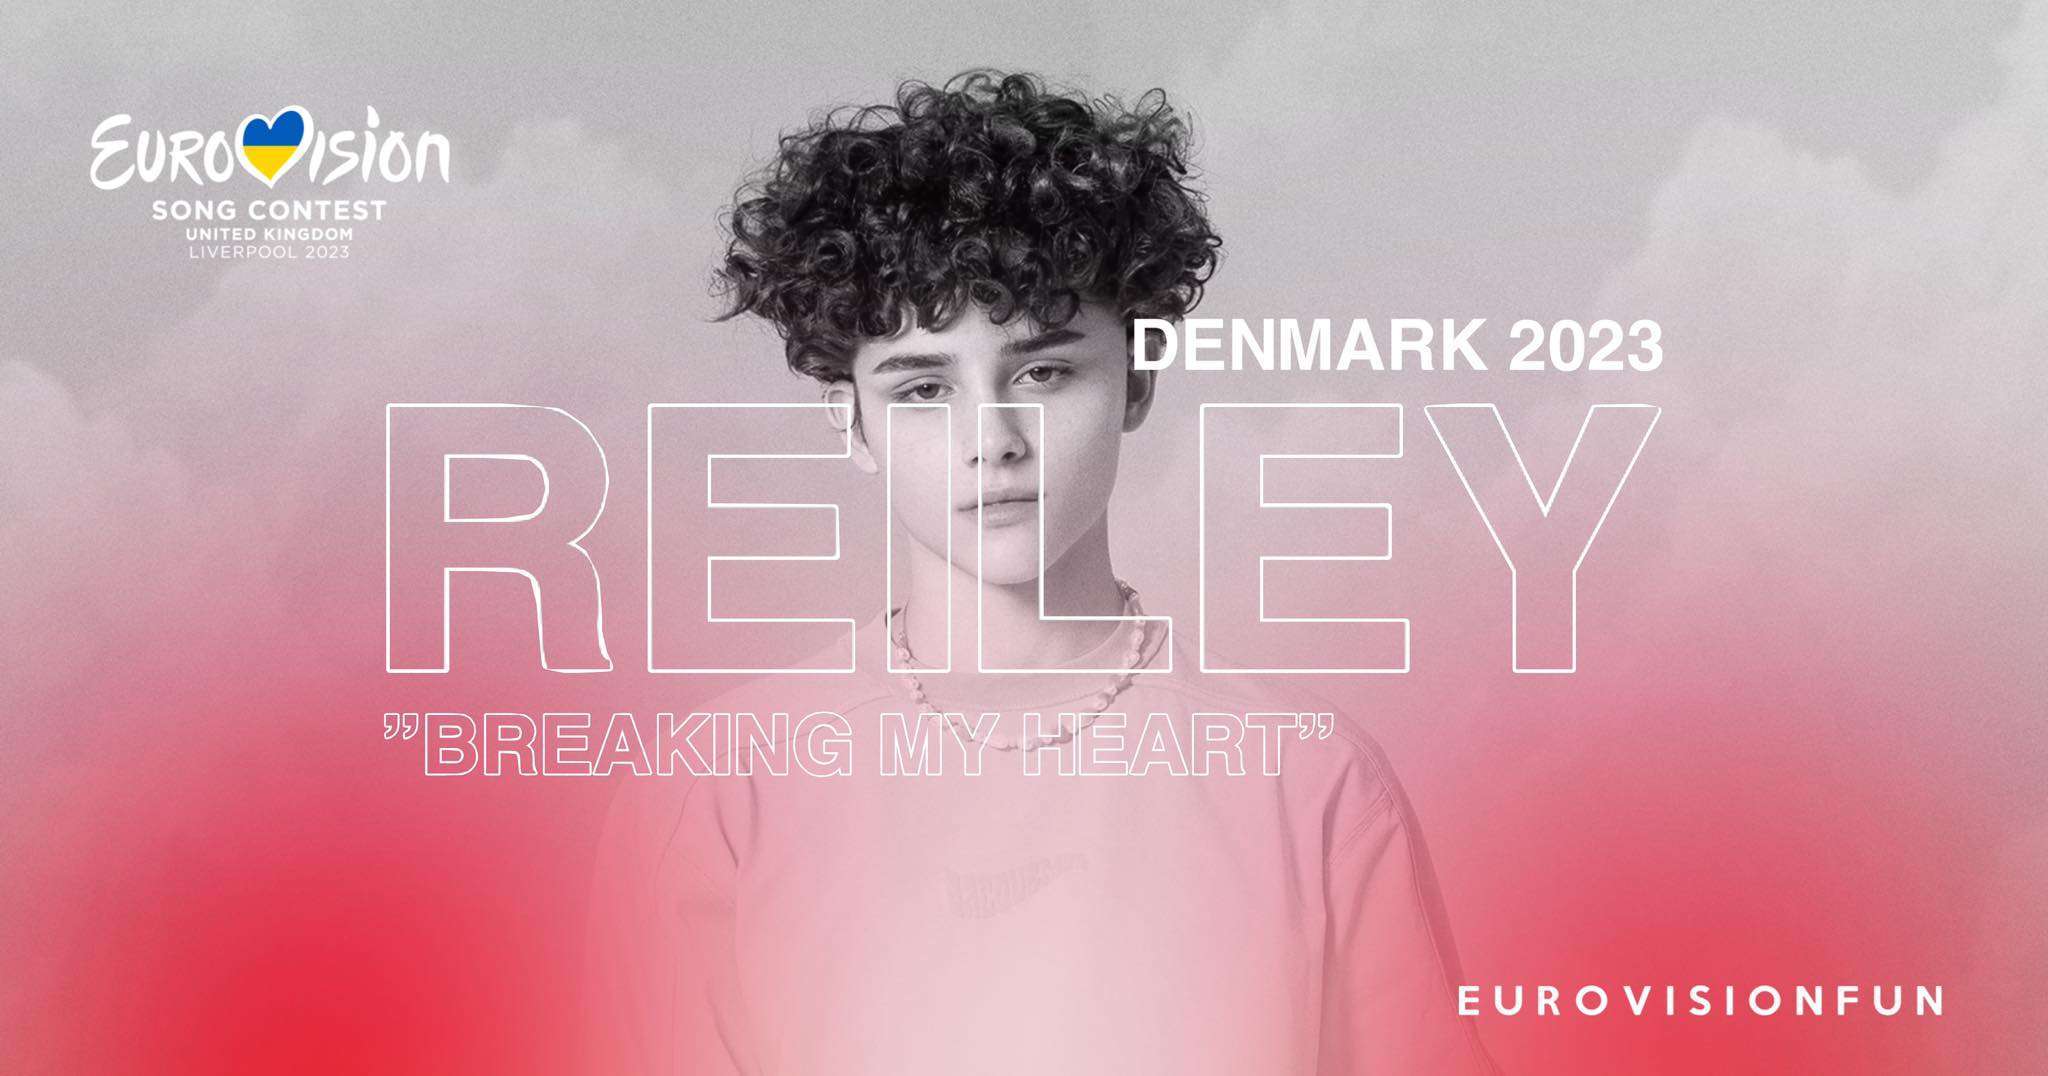 Denmark With Reiley And Breaking My Heart In Liverpool Eurovision News Music Fun 